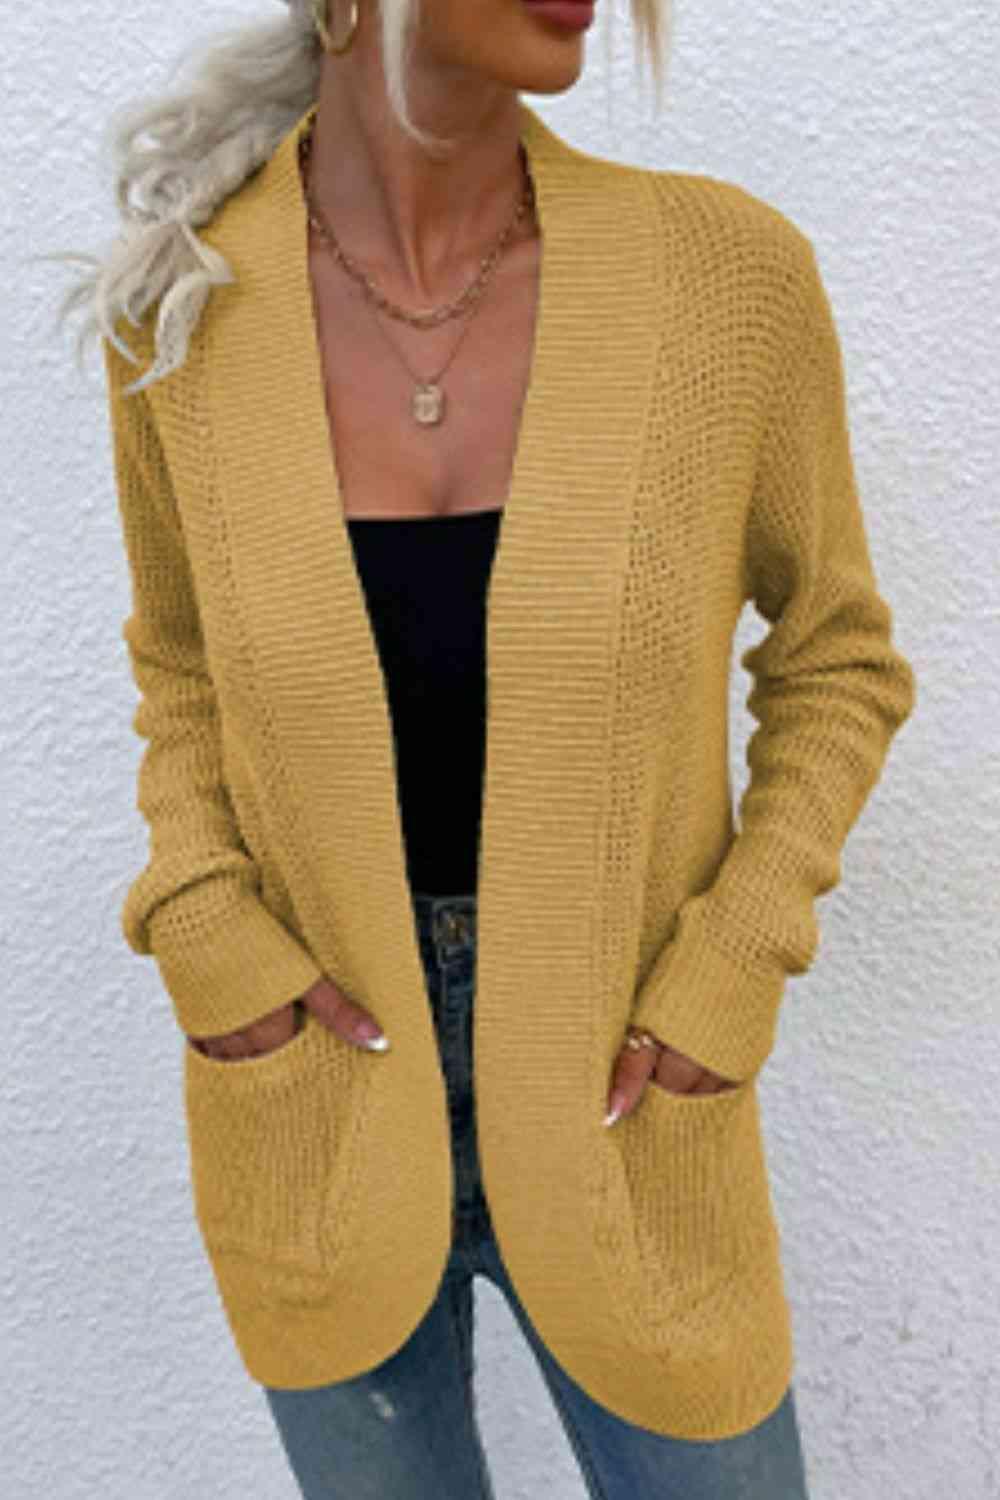 a woman wearing a mustard colored cardigan sweater